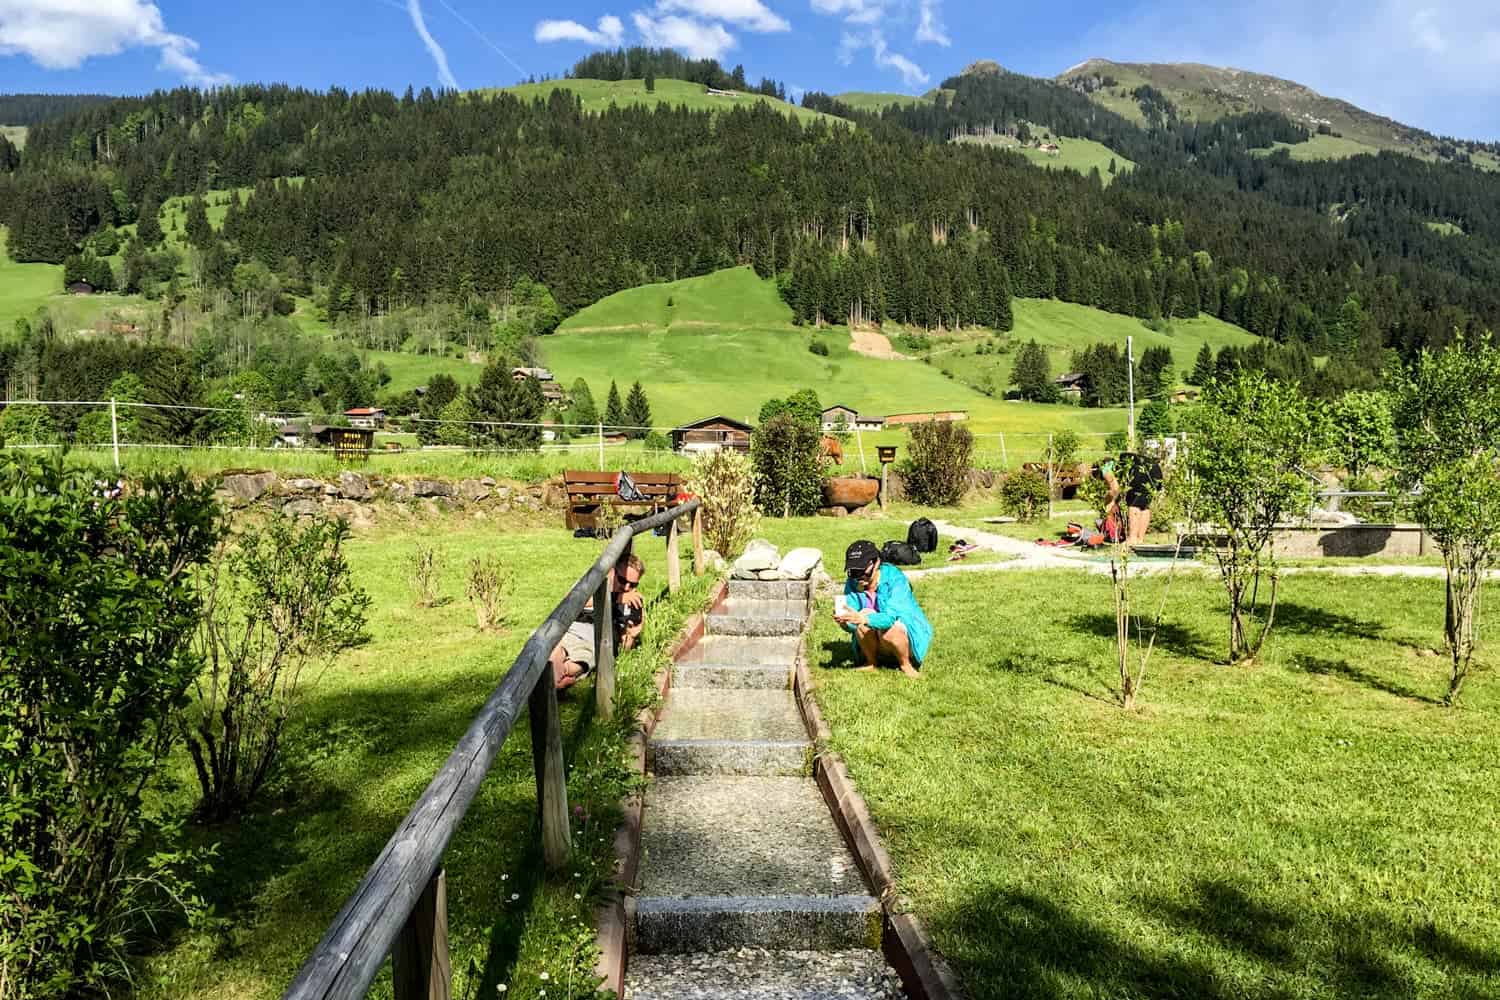 Kneipp facilities, Tirol in sping and summer, Austria